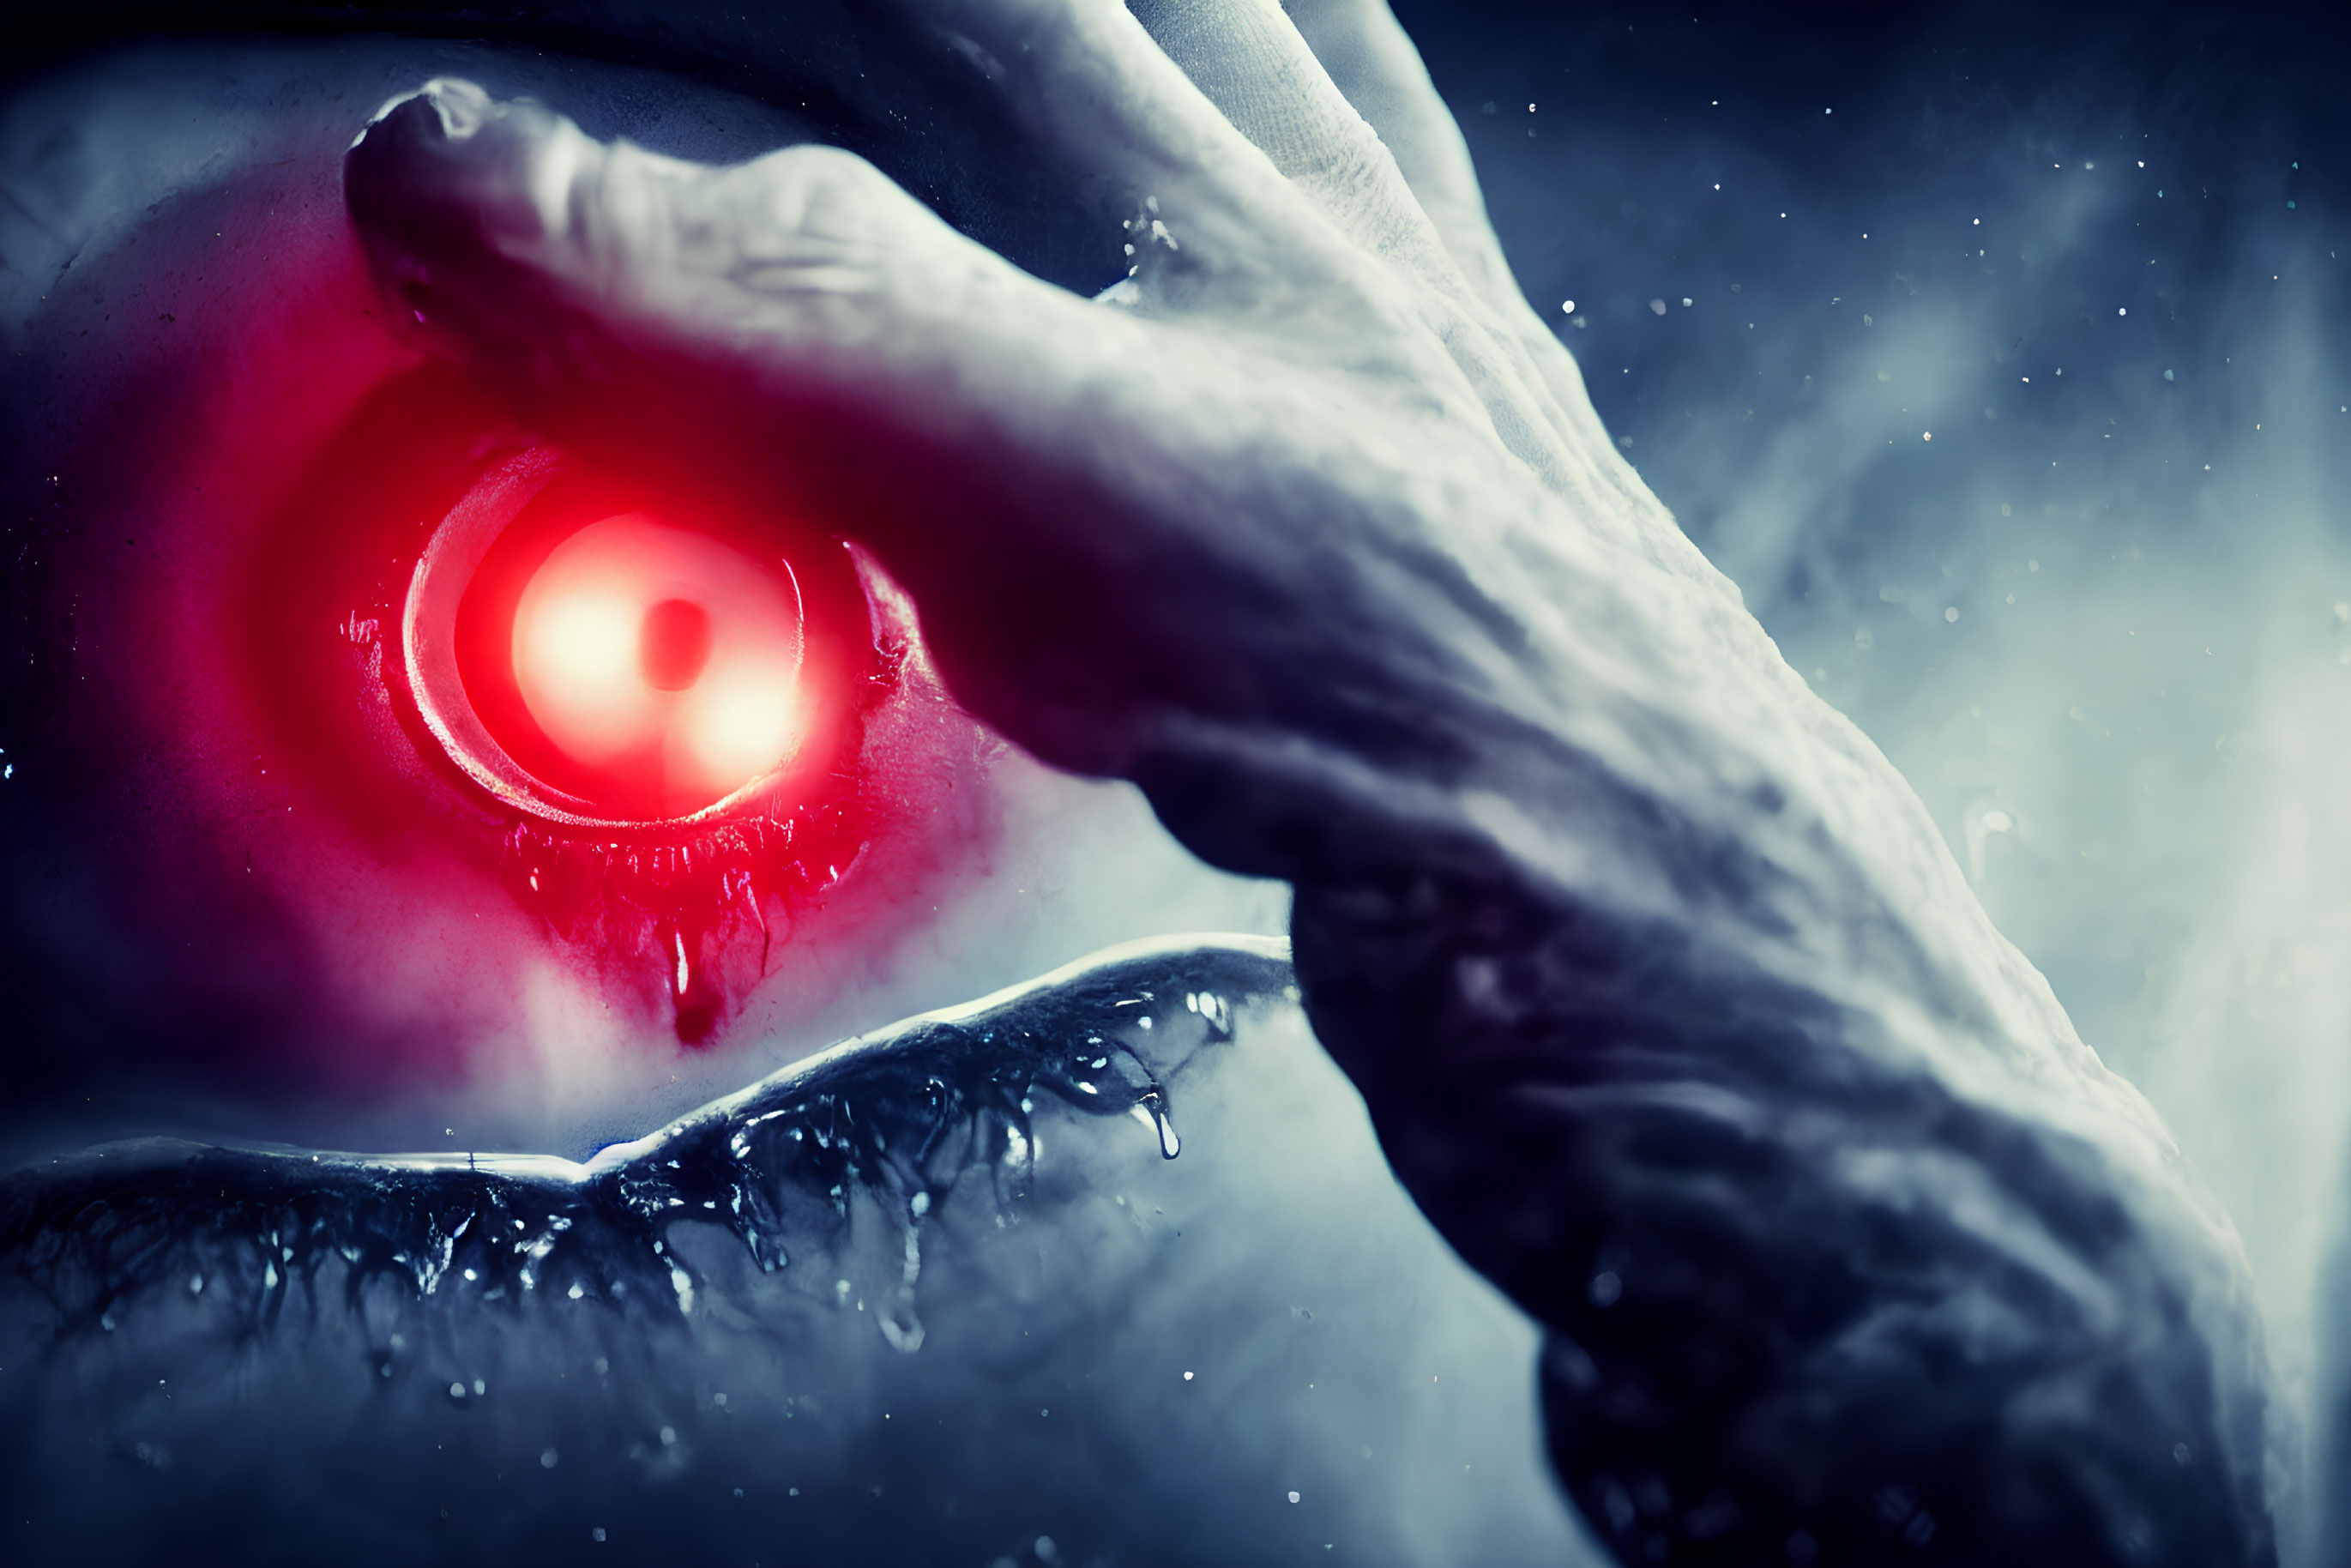 Close-up of red-eyed person in ice with reaching hand - sci-fi supernatural theme